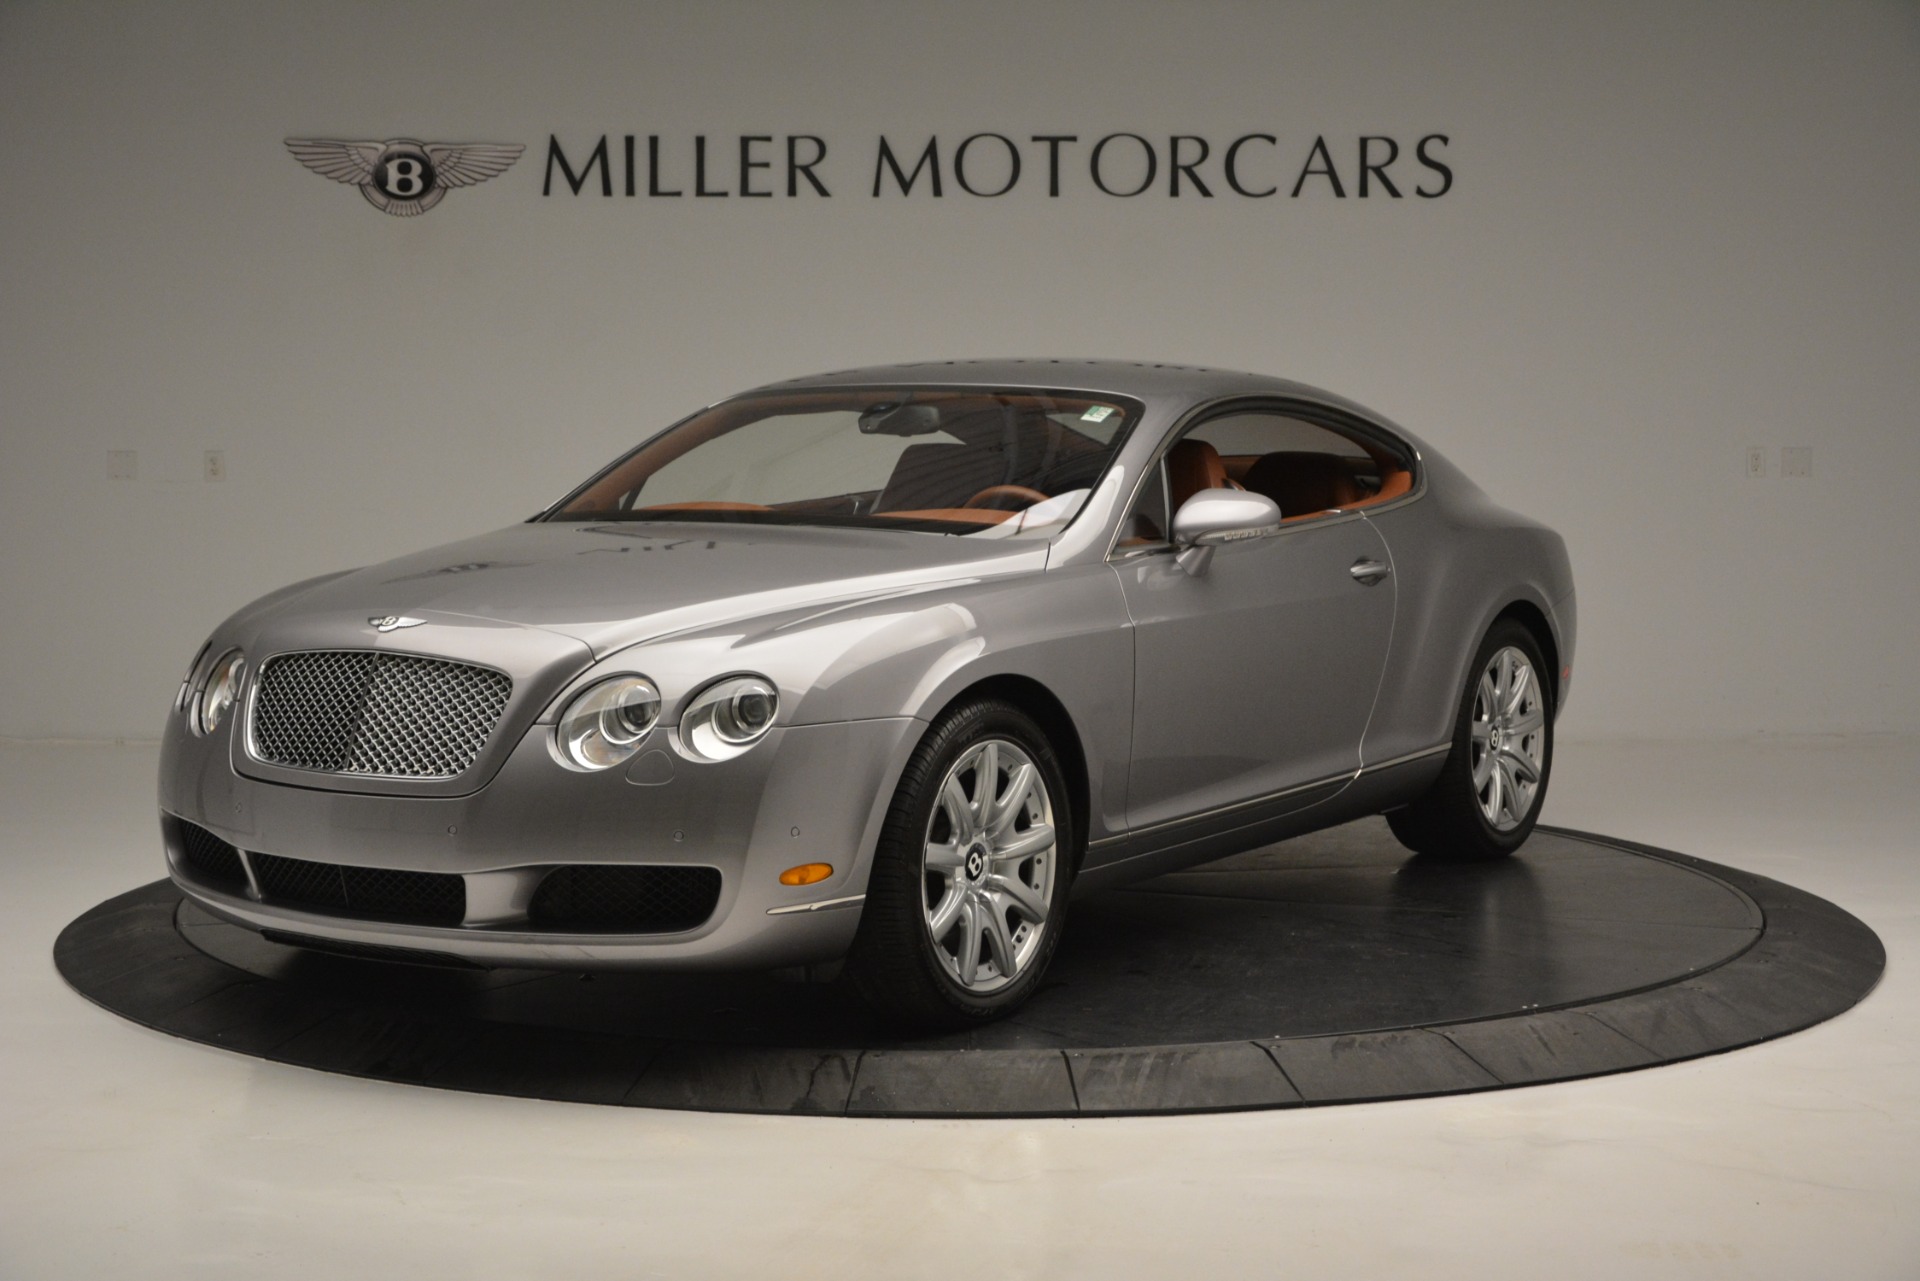 Used 2005 Bentley Continental GT GT Turbo for sale Sold at Maserati of Westport in Westport CT 06880 1